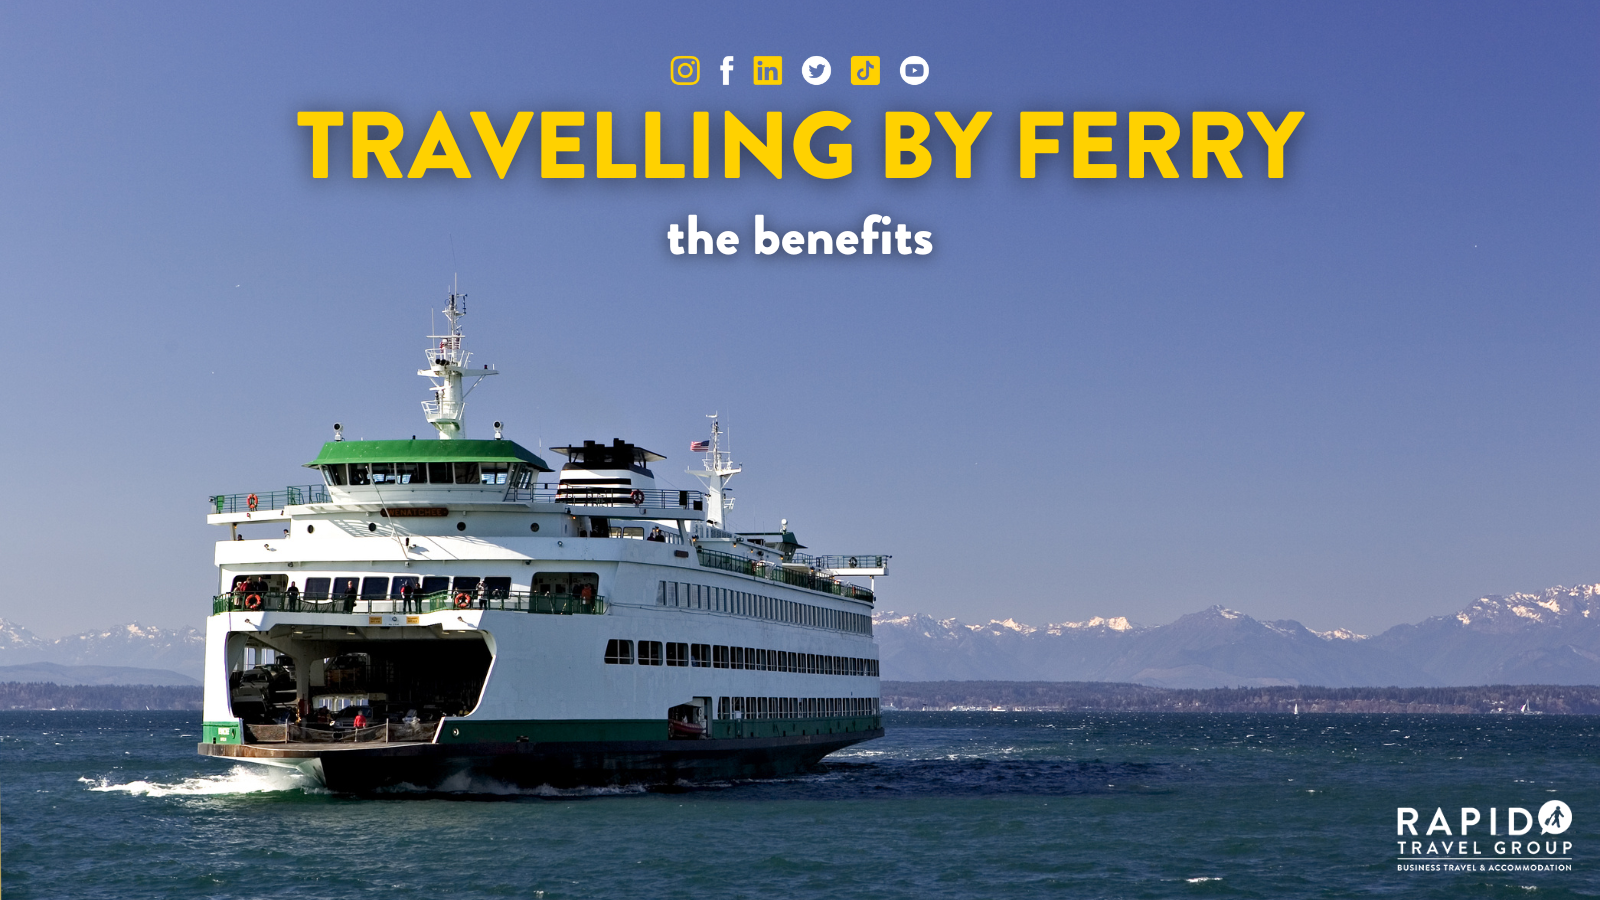 Travelling by ferry: the benefits